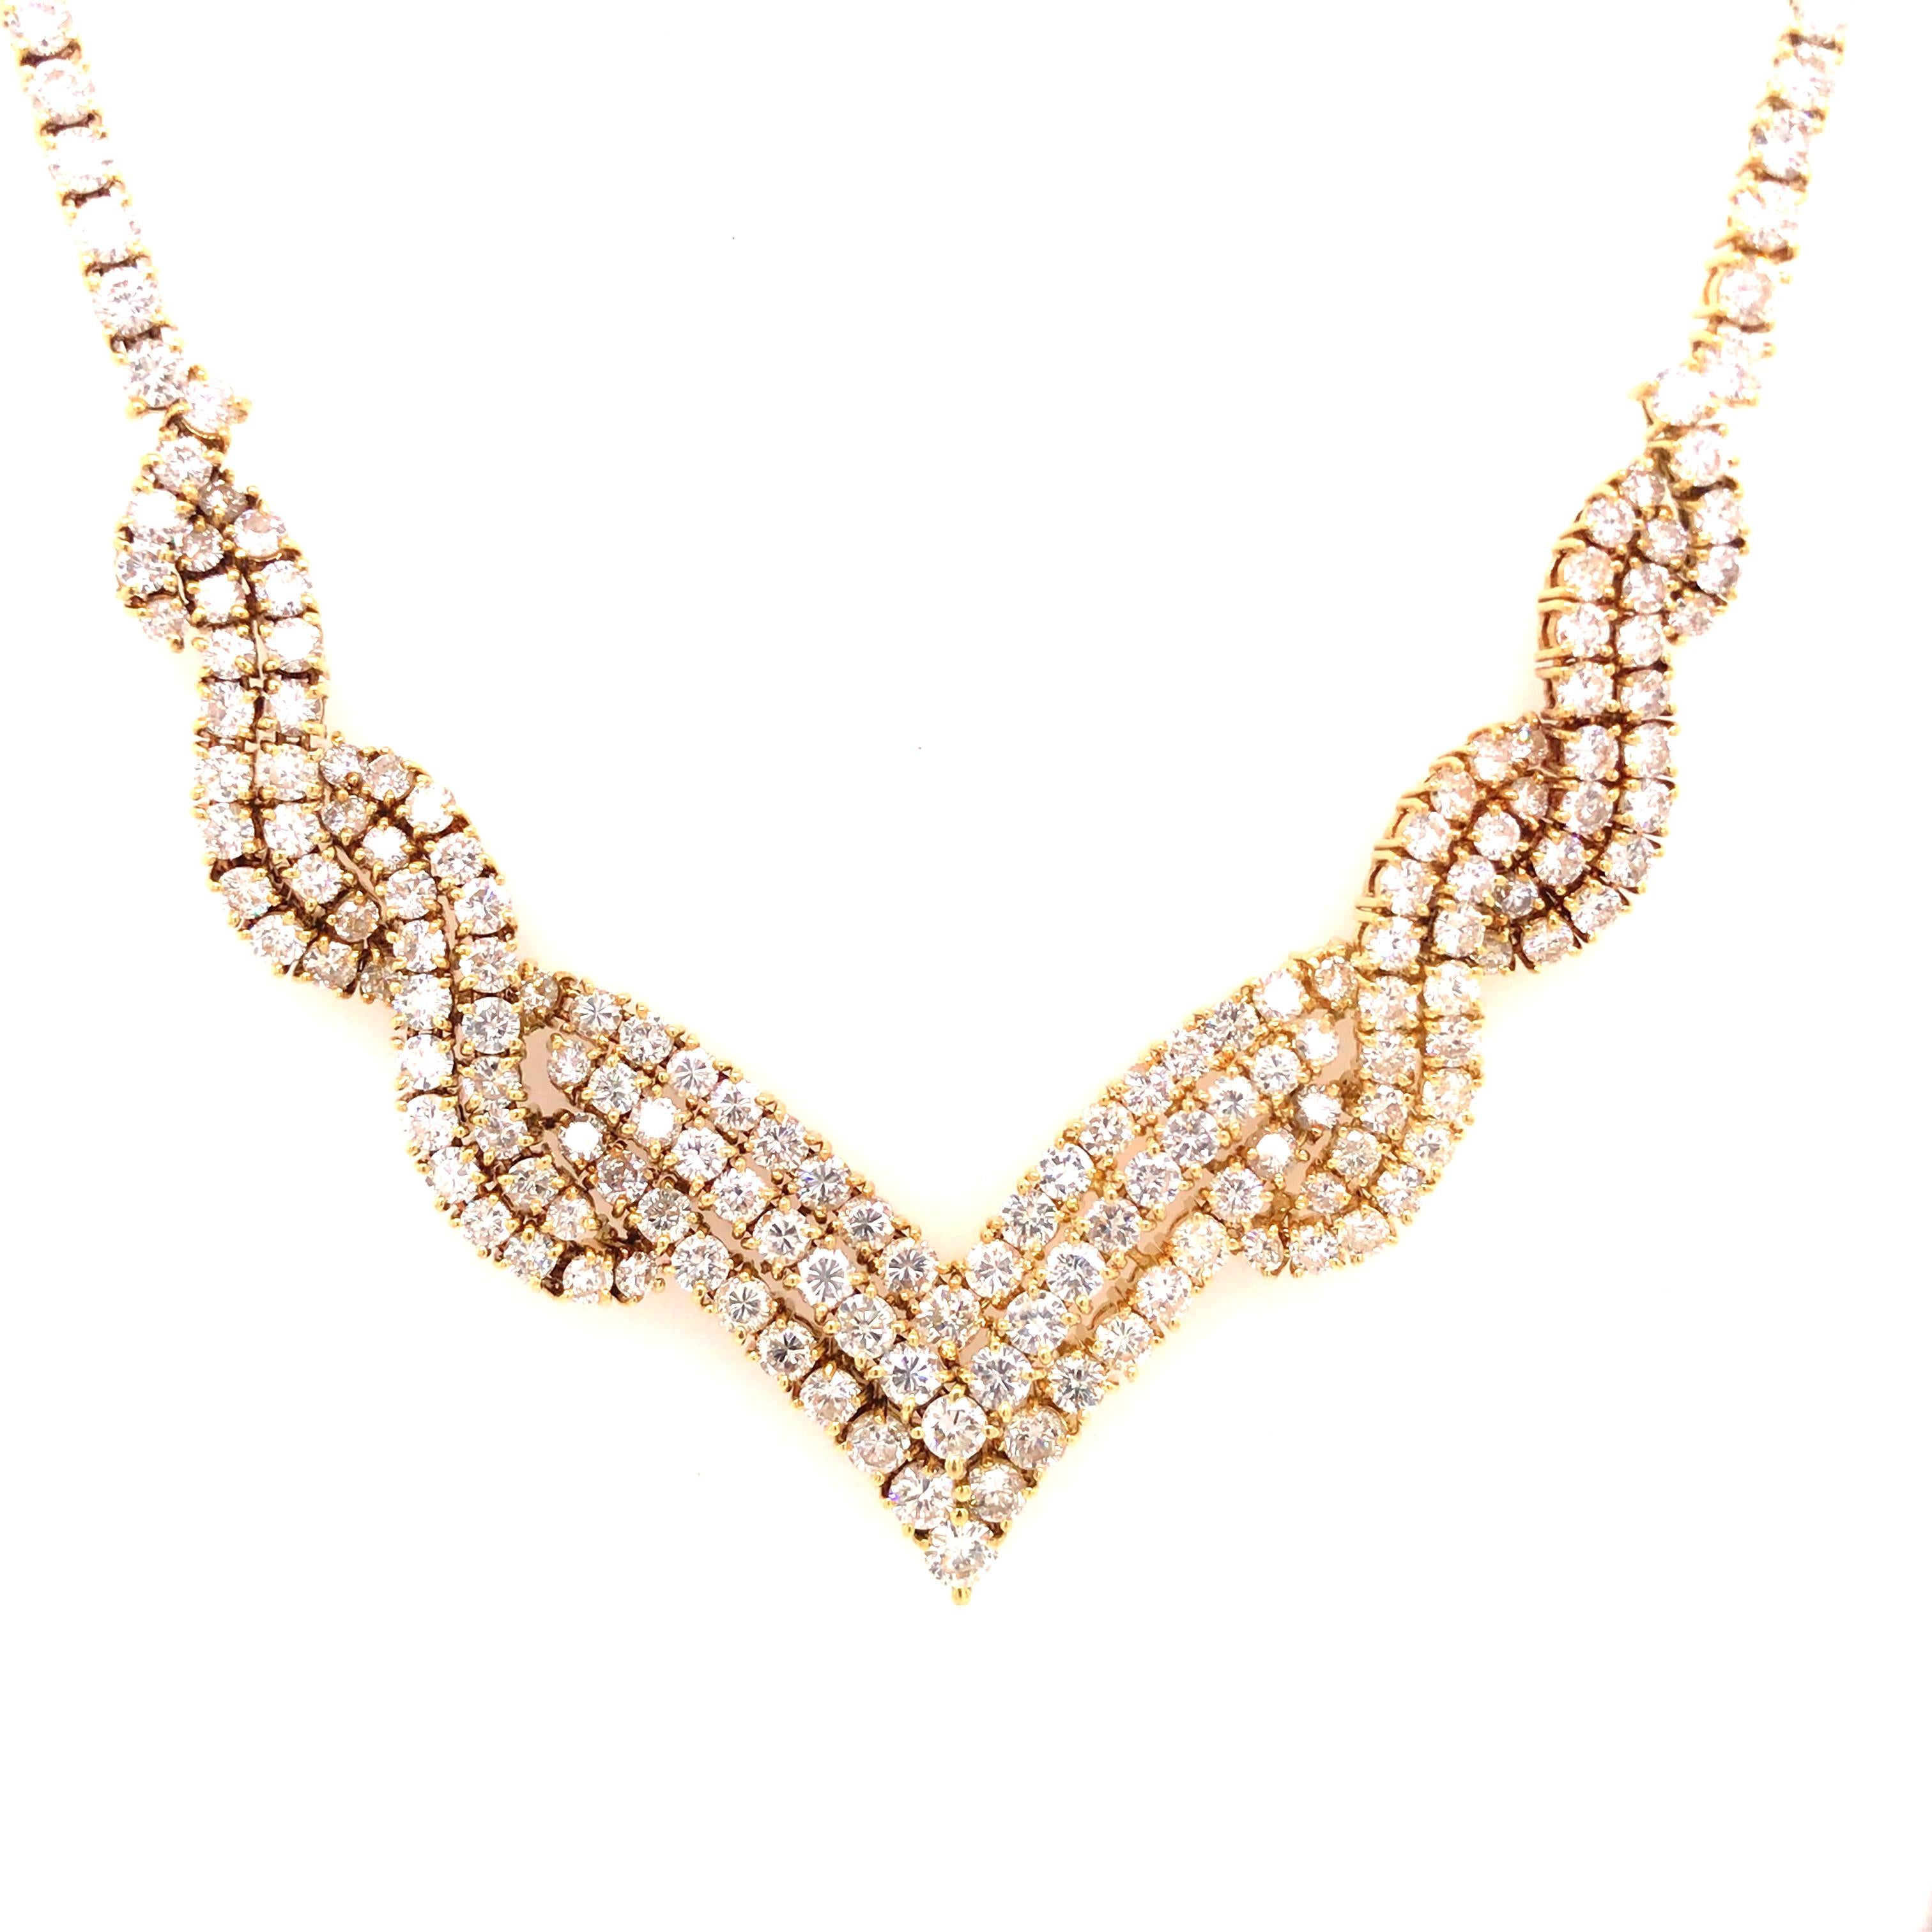 Diamond Weave V Necklace in 18K Yellow Gold.  Round Brilliant Cut Diamonds weighing 23.0 carat total weight, G-H in color and VS-SI in clarity are expertly set.  The Necklace measures 16 1/2 inch in length and 1/2 inch in width at the widest point. 